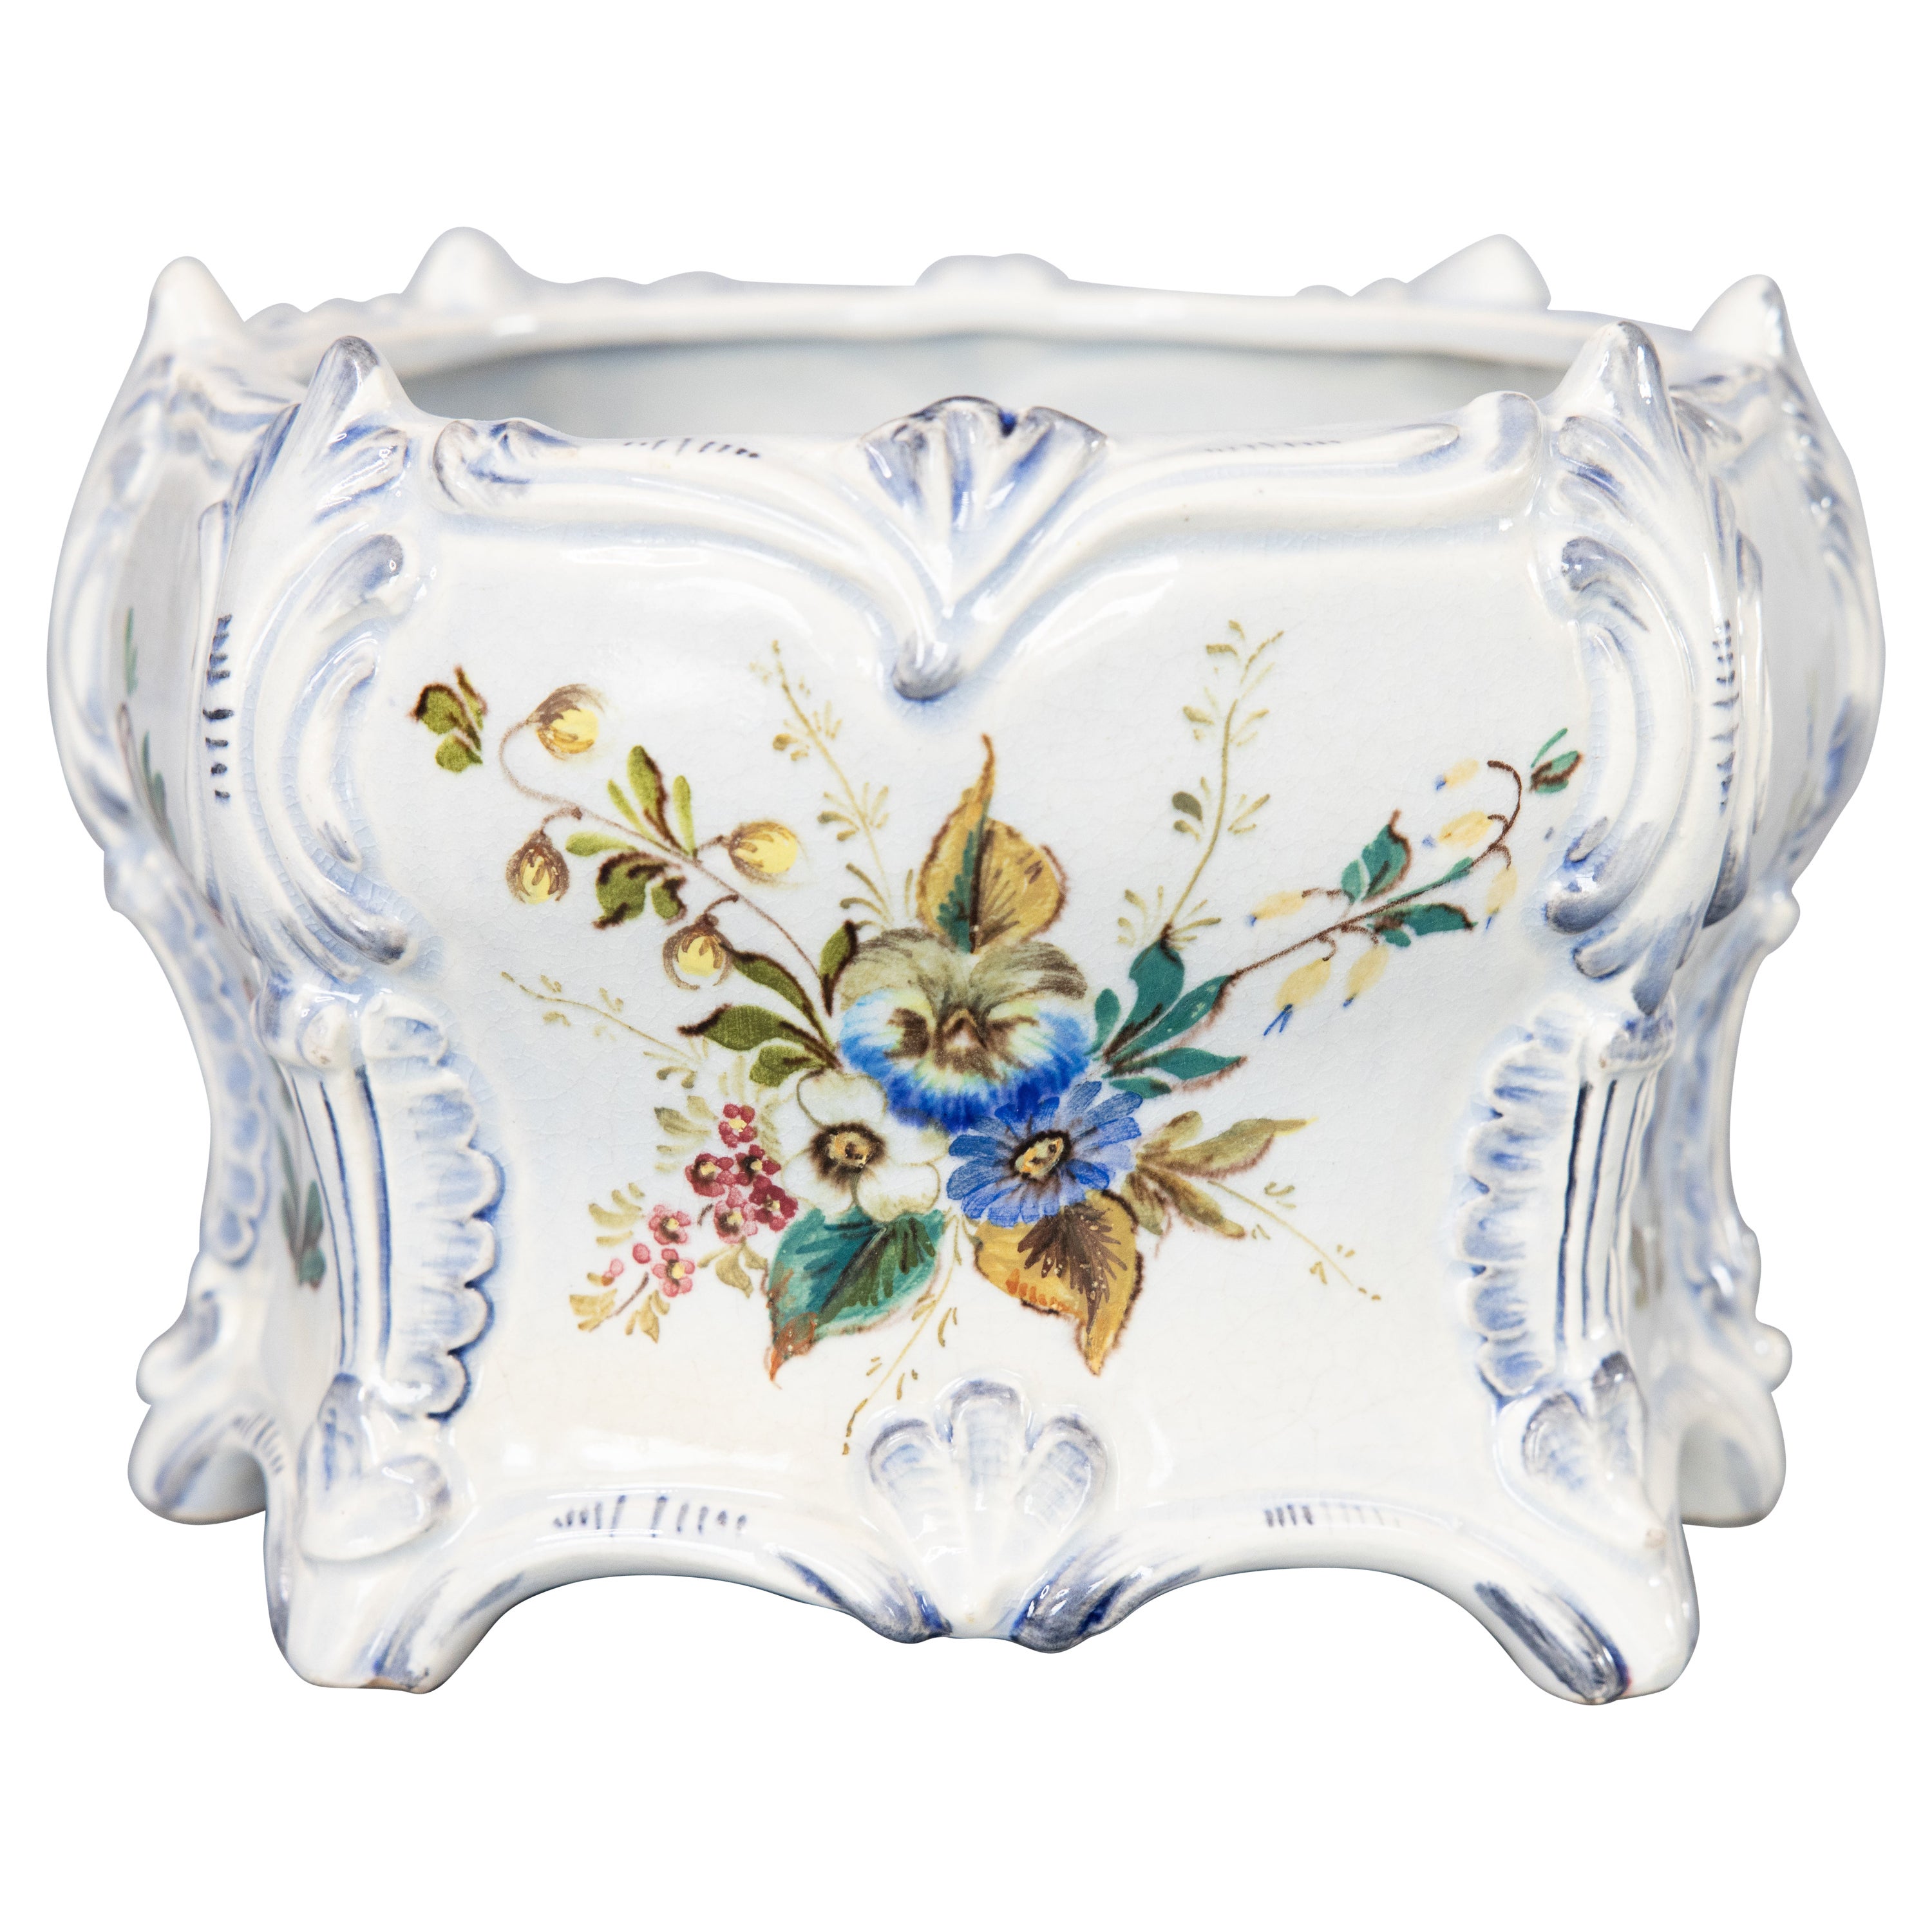 19th Century, French Country Floral Faience Cachepot Jardiniere Planter